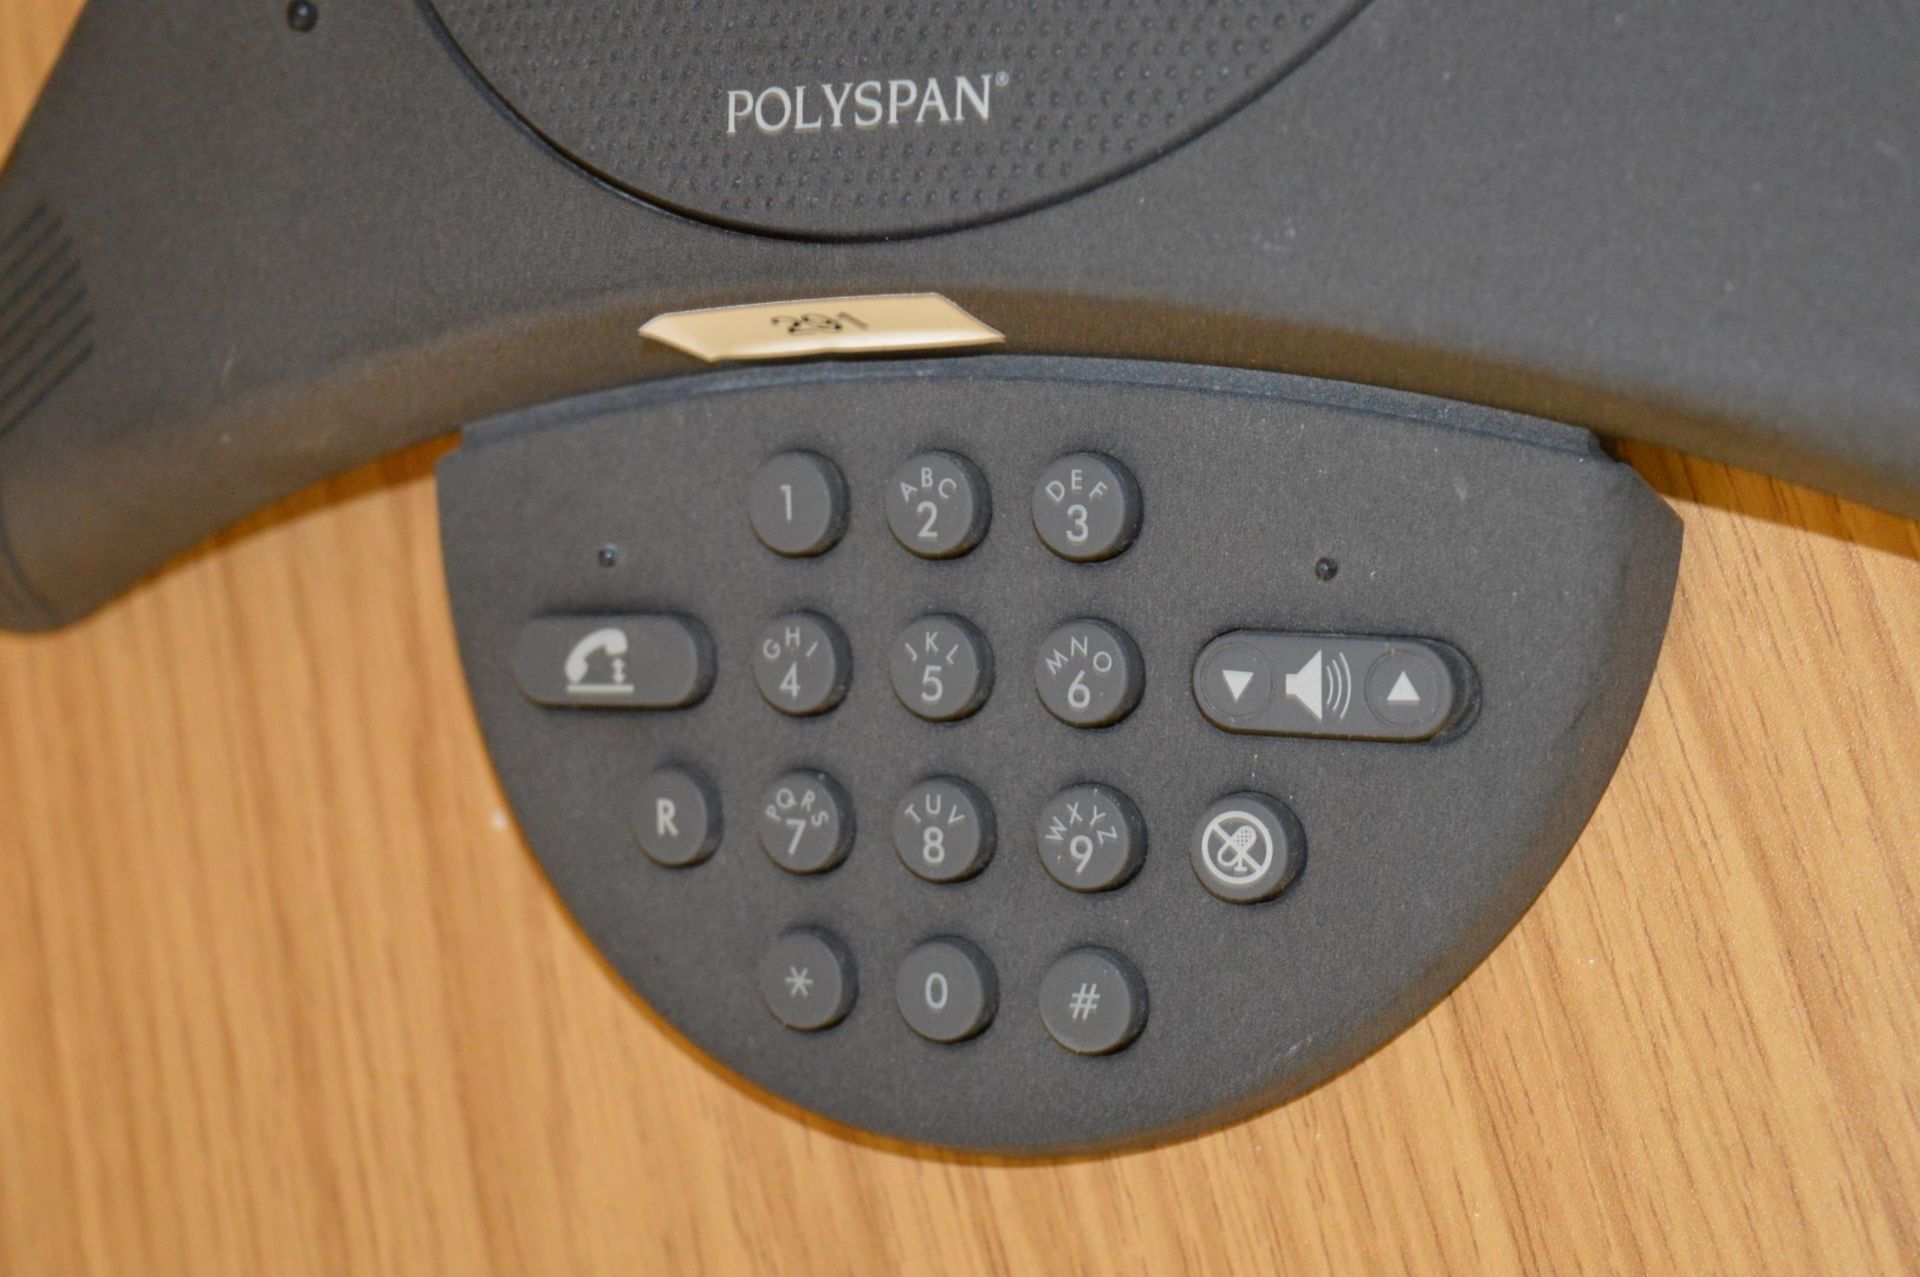 1 x Polycom Soundstation 2 LCD Conference Phone - Model 2201-1600-01 - Features 3 Cardioid - Image 4 of 4